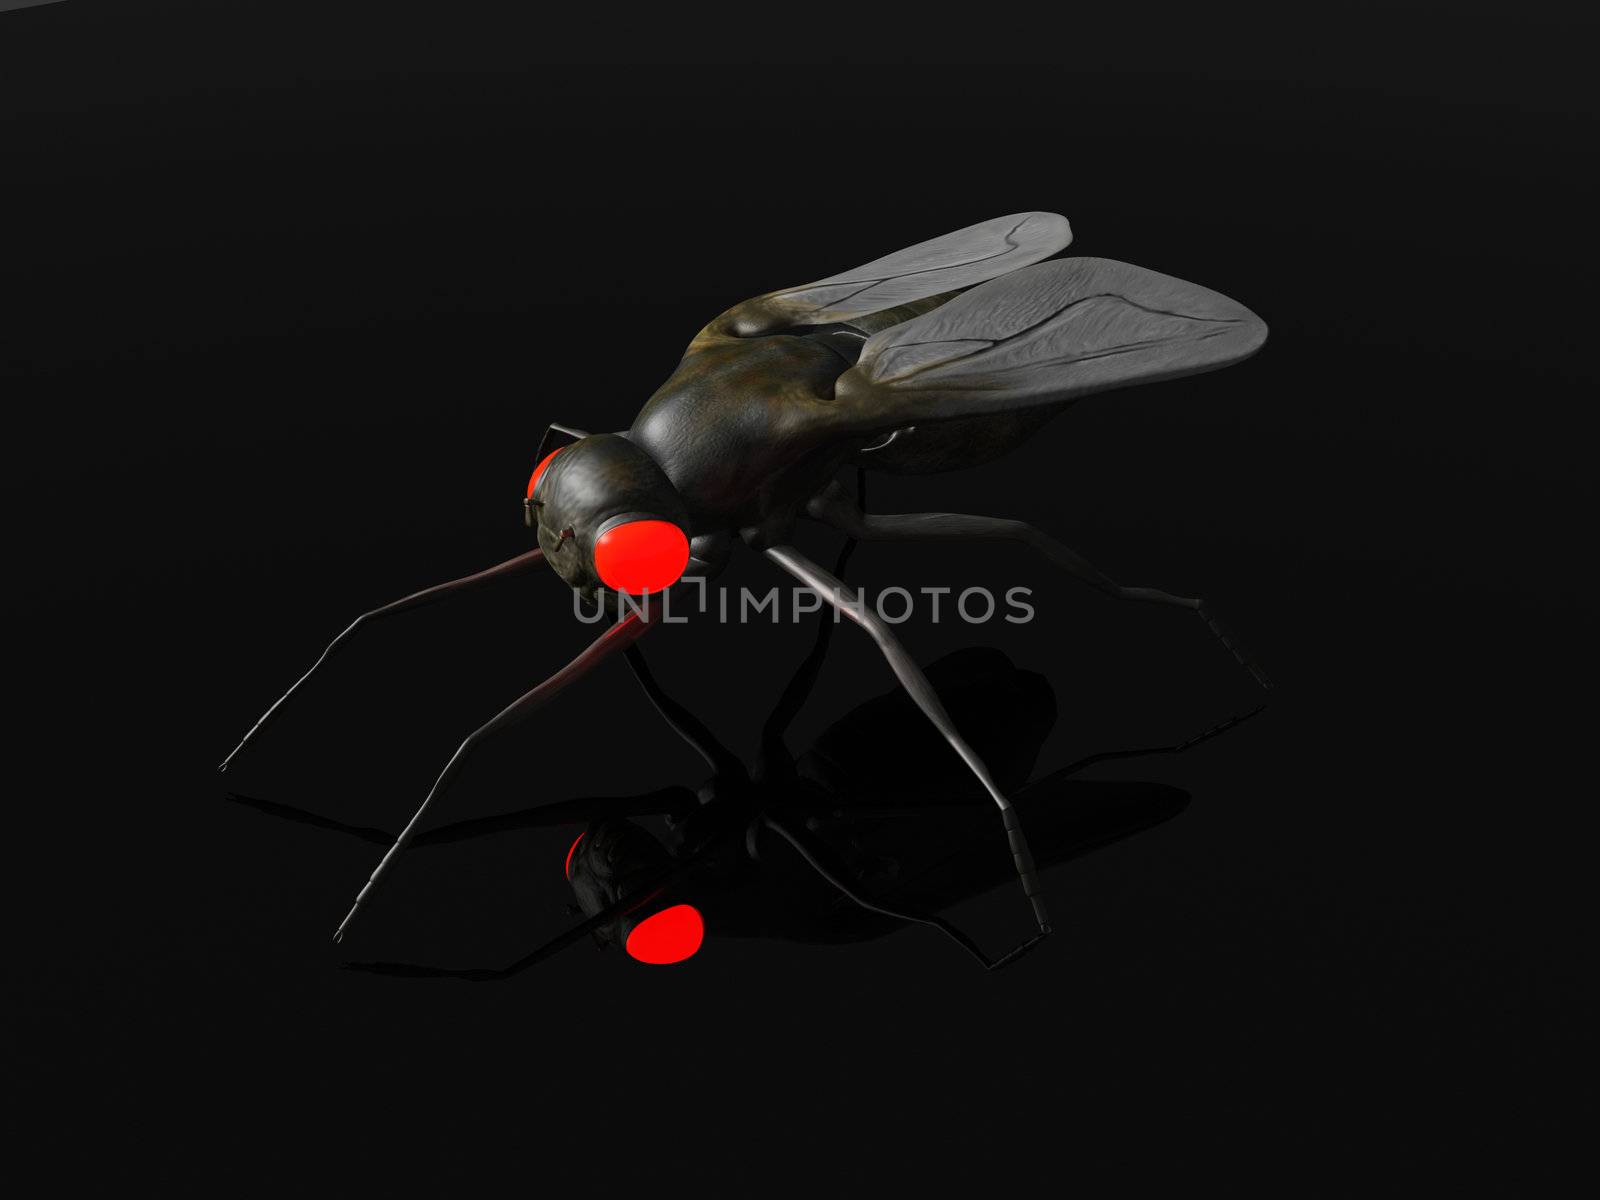 3D rendered Illustration. An evil Fly in the Dark.